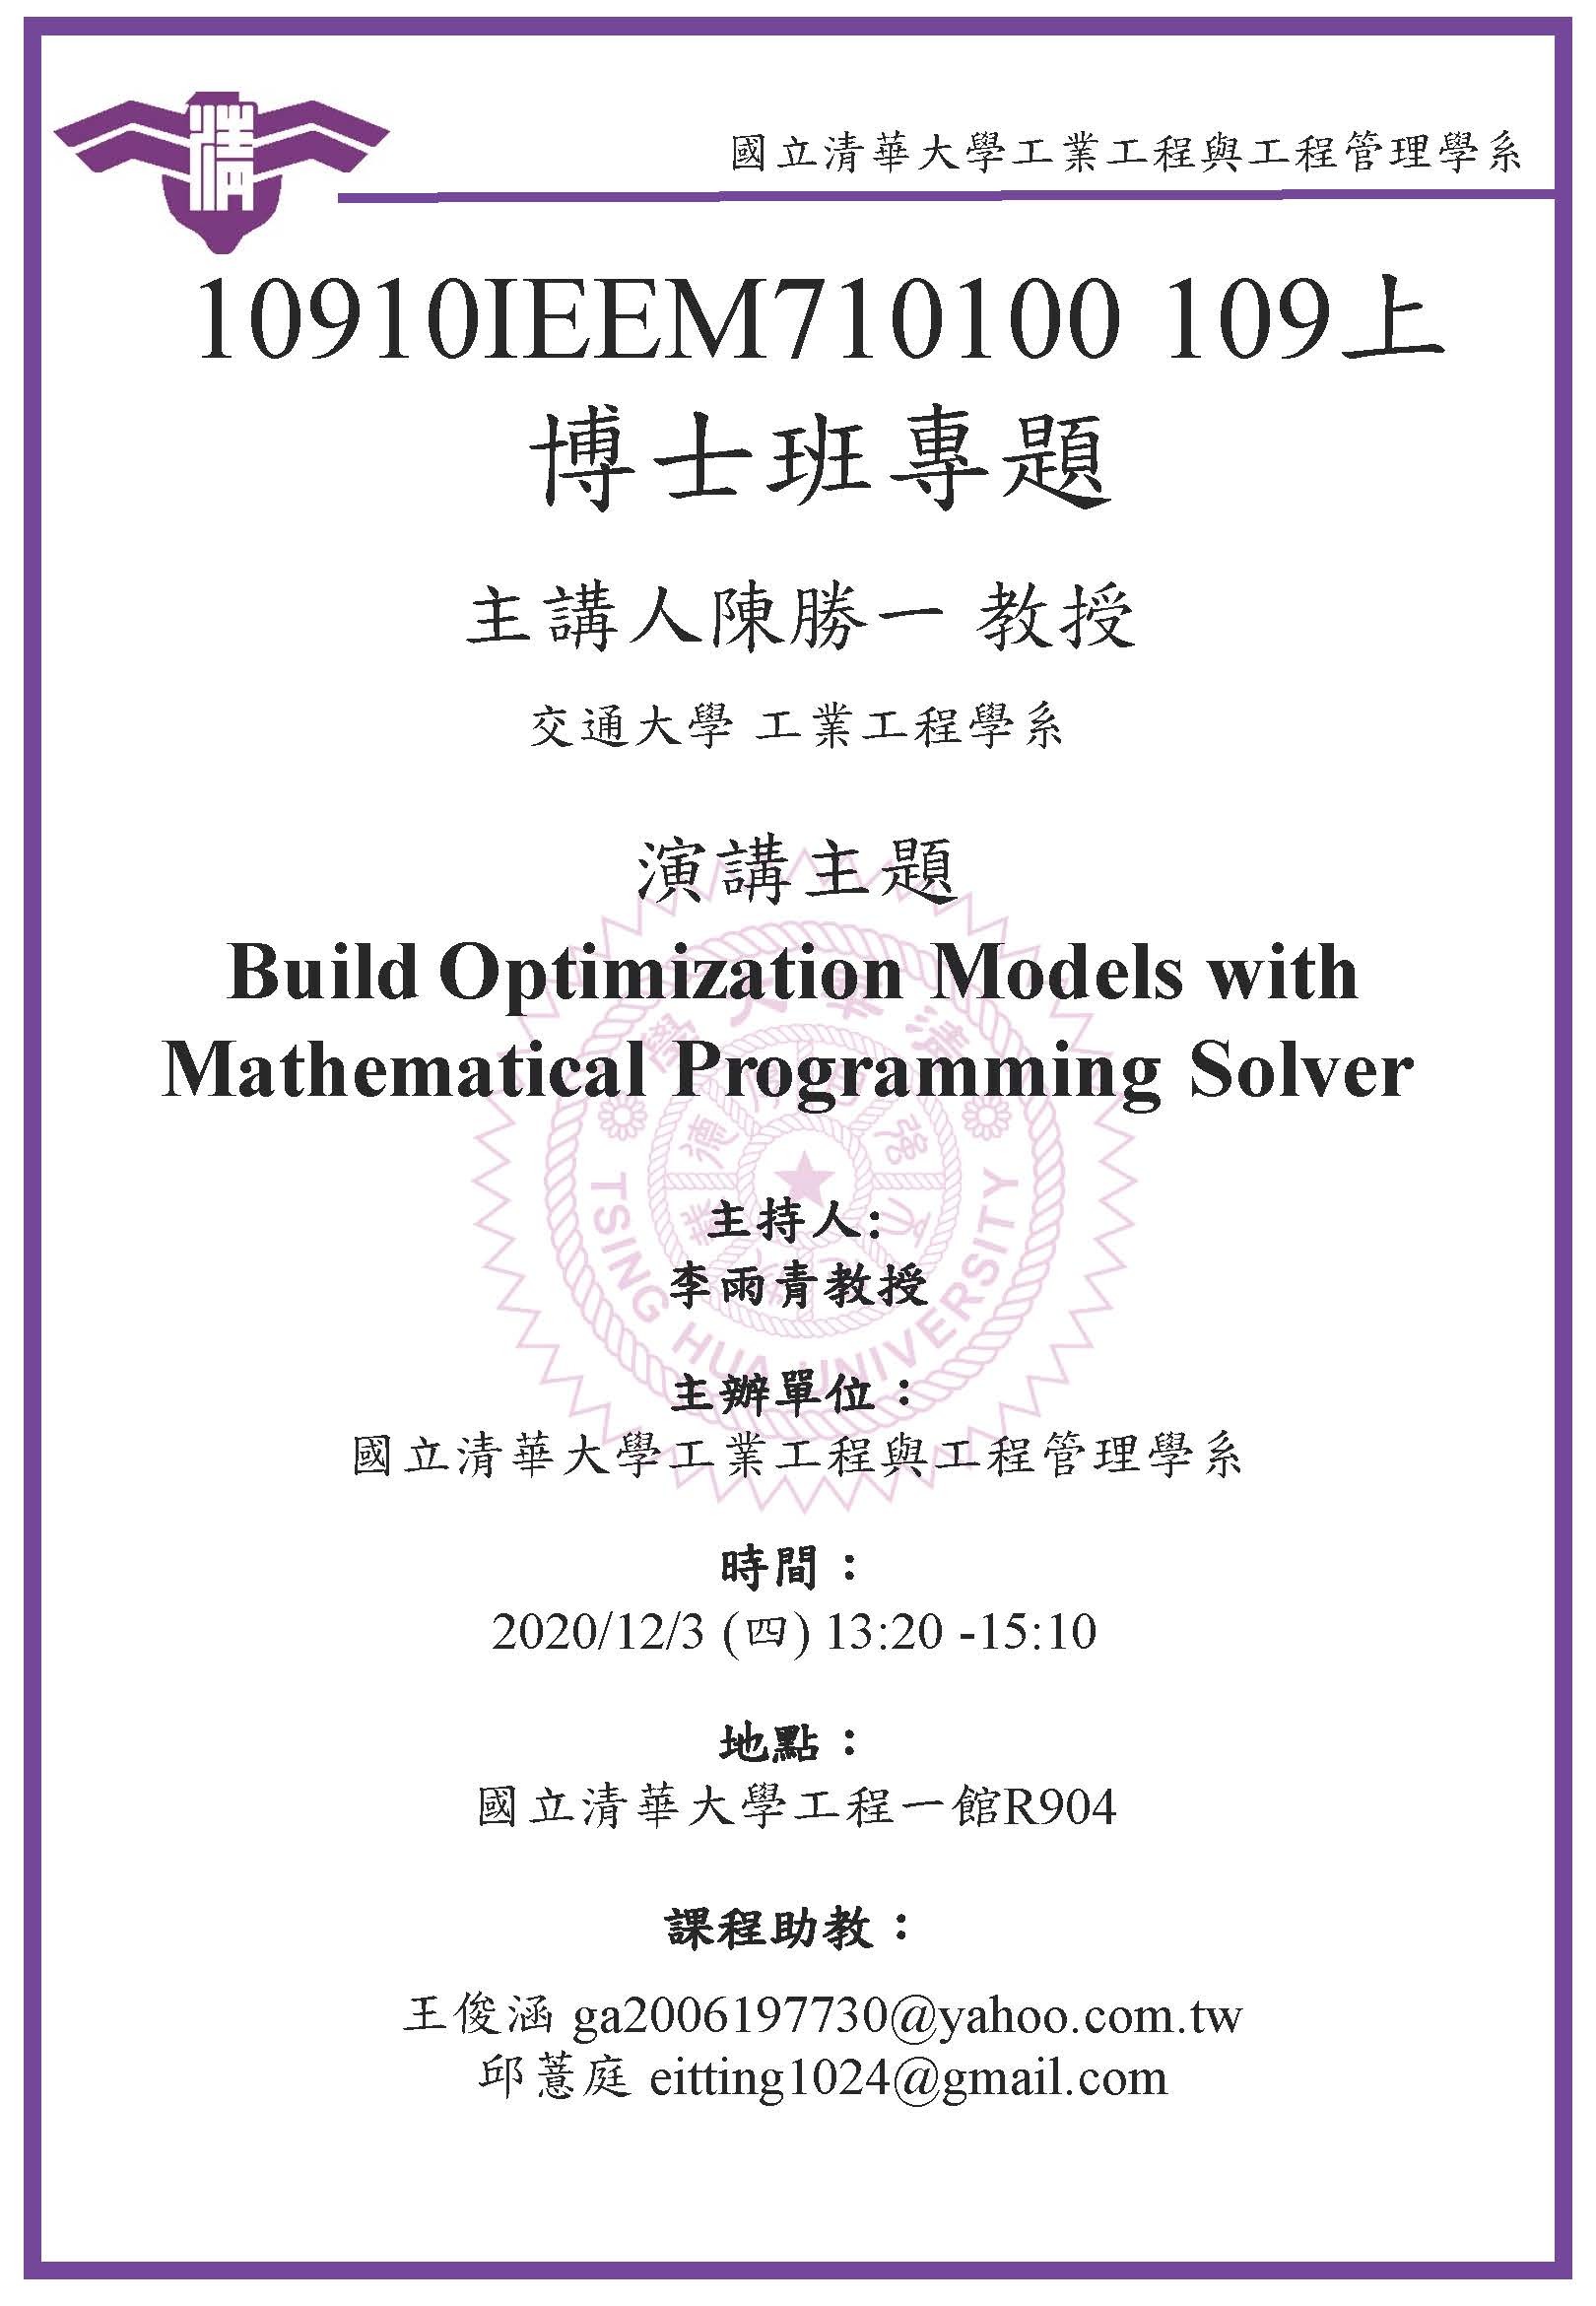 Build Optimization Models with Mathematical Programming Solver